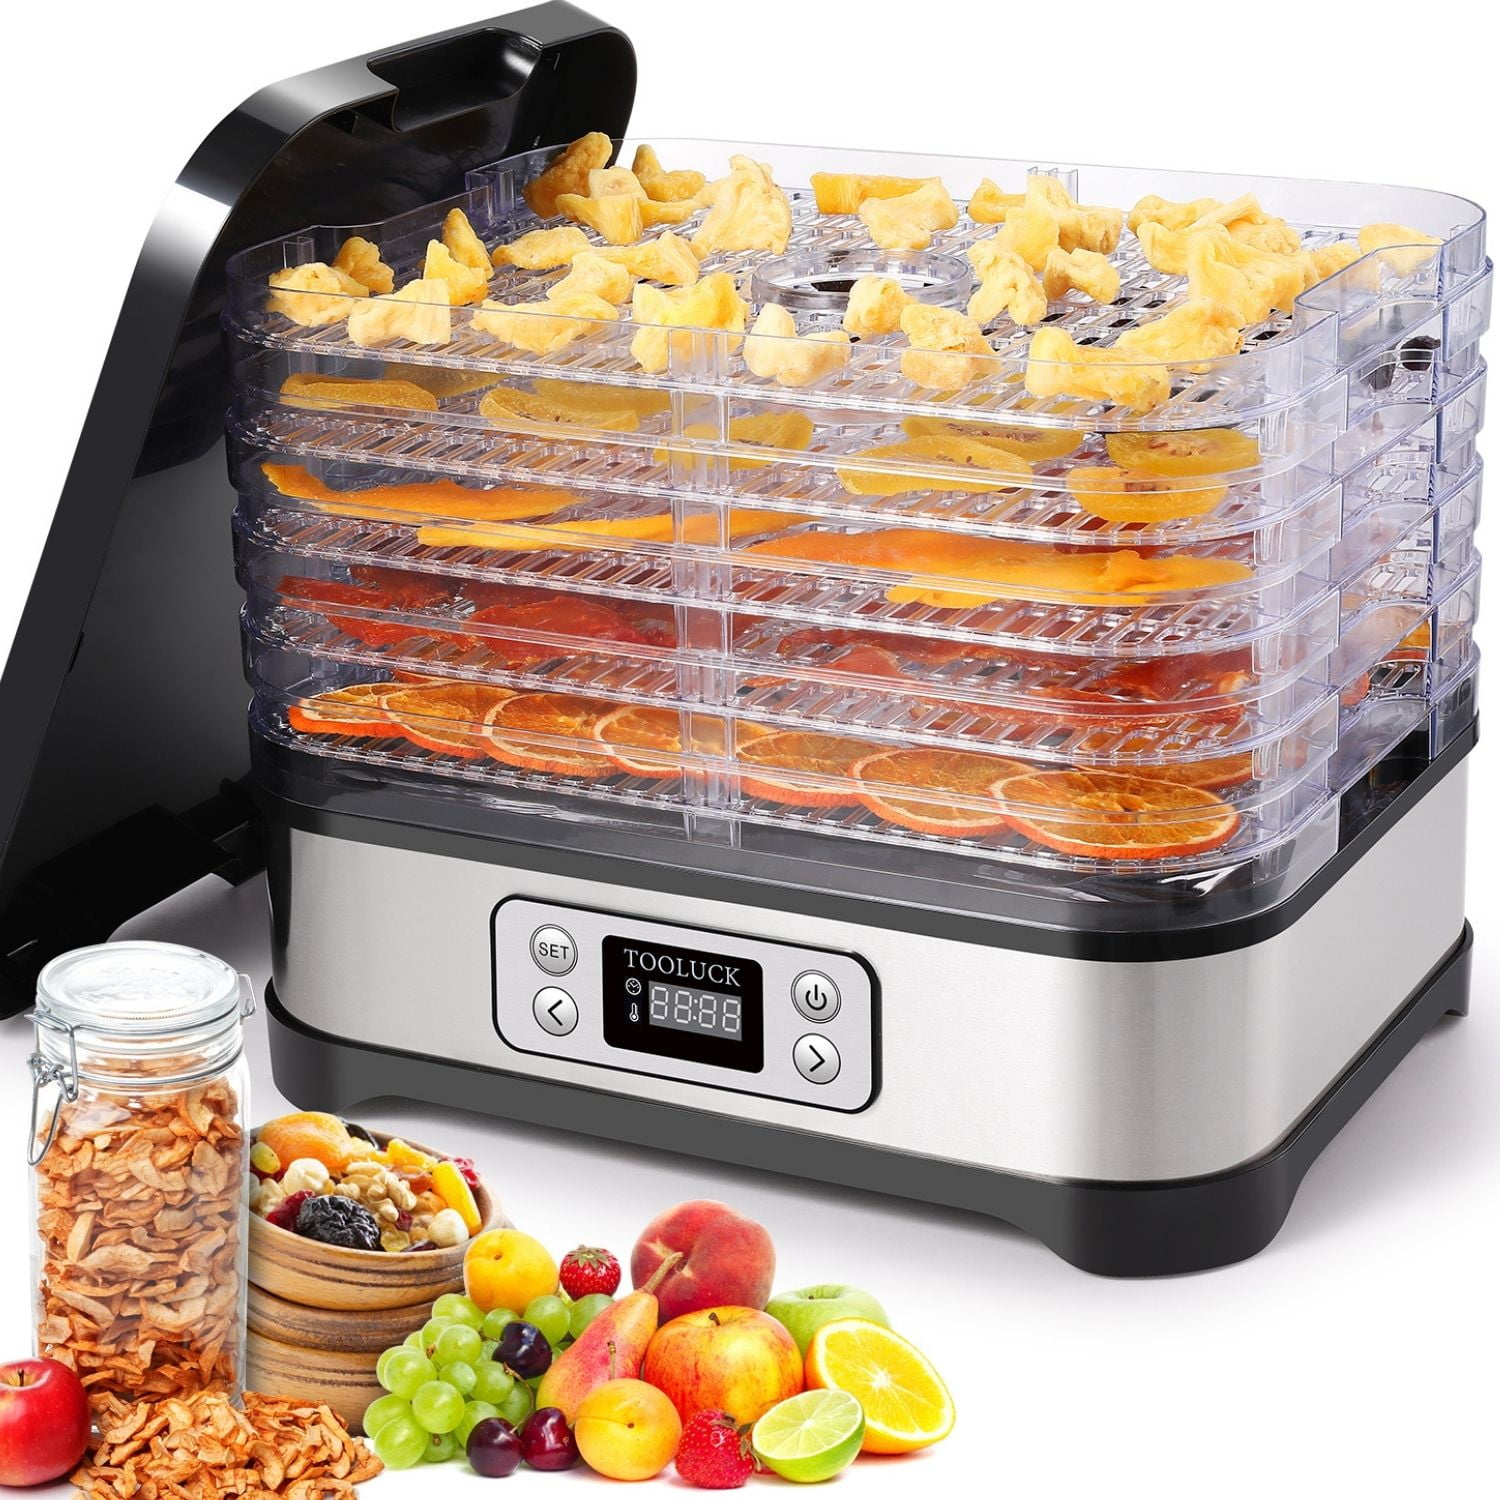 Ivation 10 Tray Premium Stainless Steel Electric Food Dehydrator